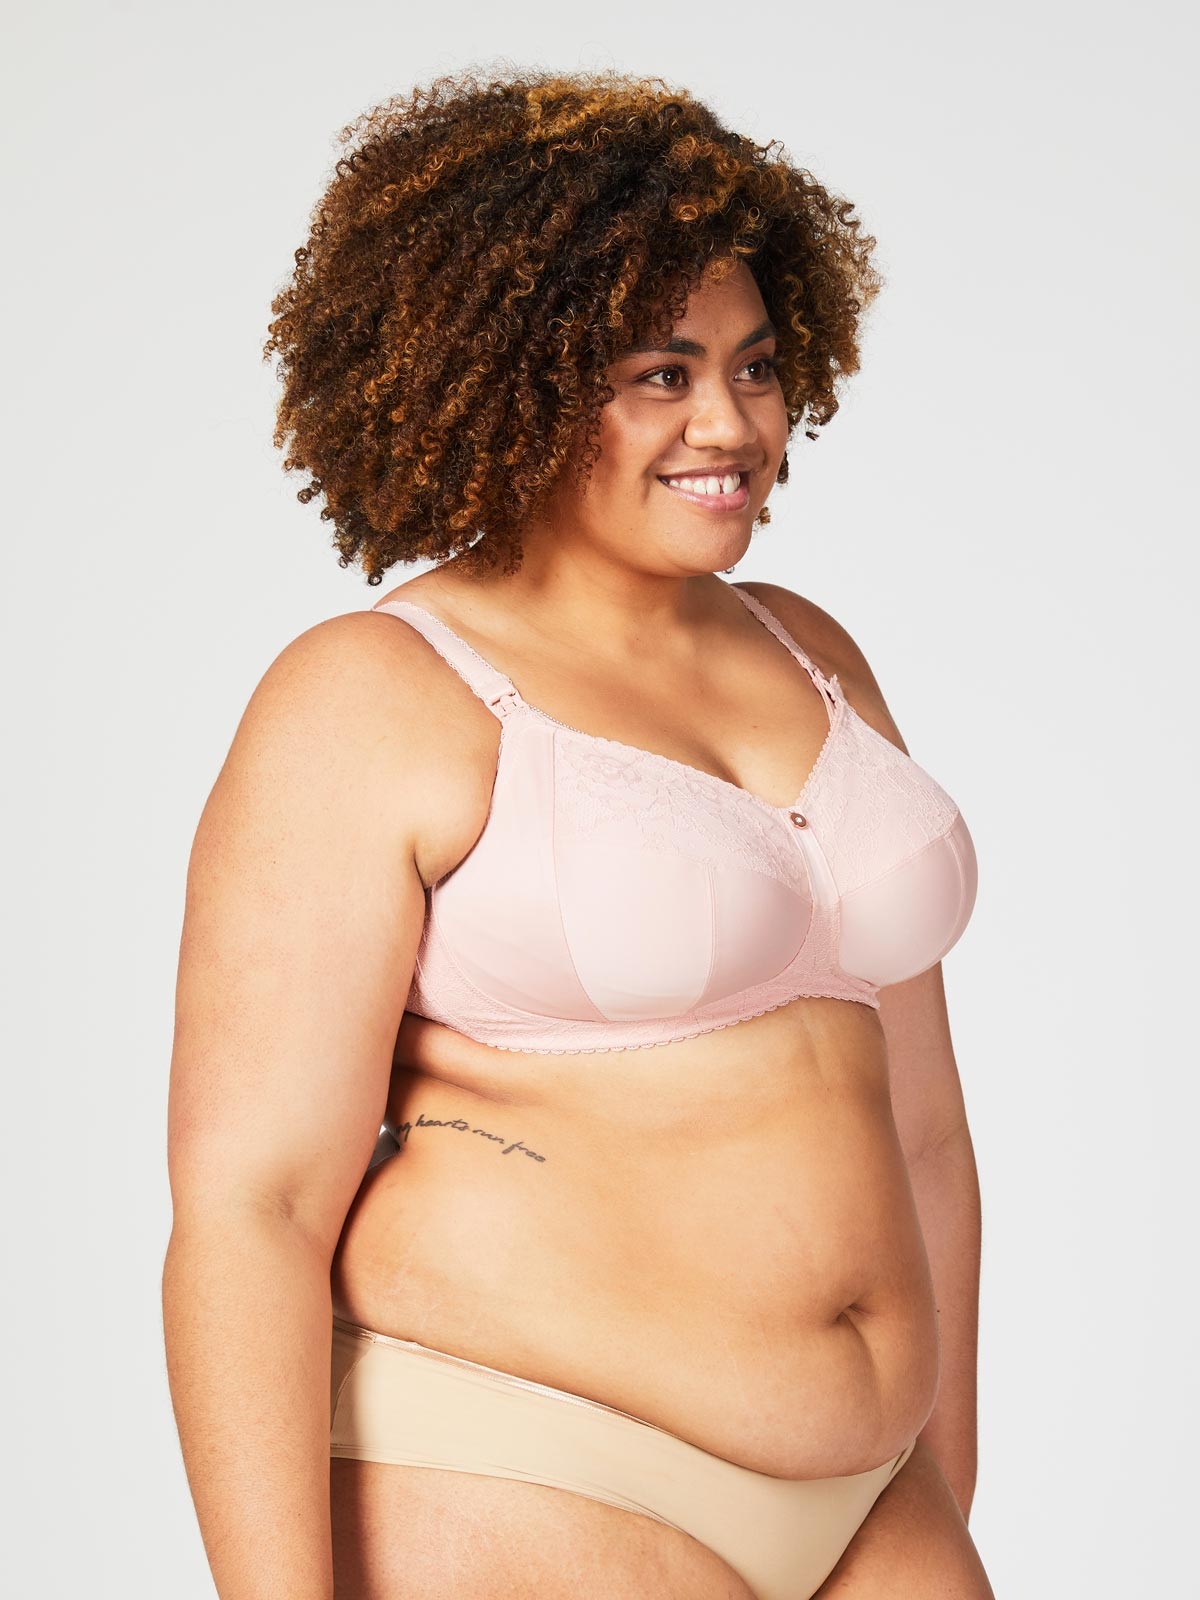 It looks like a basic, essential, natural fit Nursing Bra, but